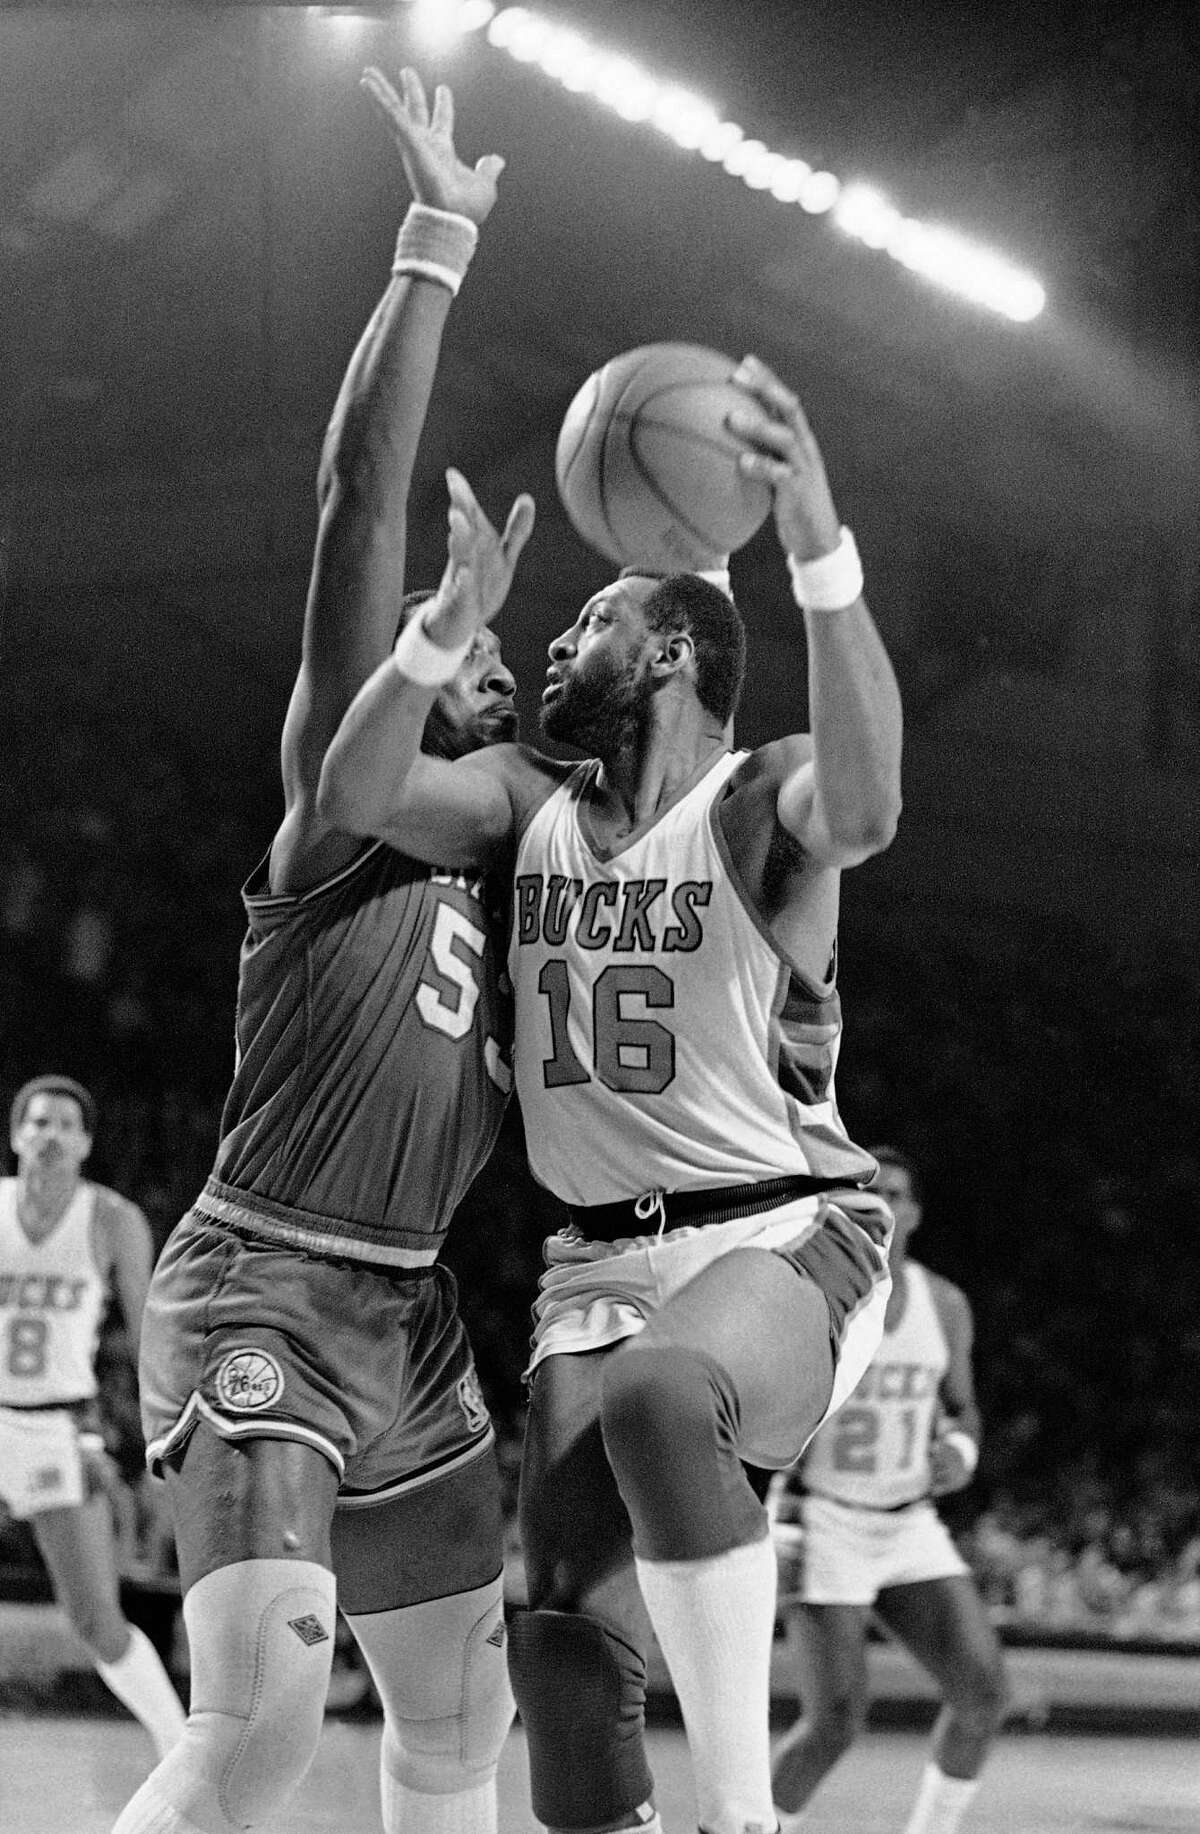 FILE -Milwaukee Bucks Bob Lanier (16) moves for the basket as Philadelphia 76ers Darryl Dawkins defends during an NBA playoff game, April 13, 1981 in Milwaukee. Bob Lanier, the left-handed big man who muscled up beside the likes of Kareem Abdul-Jabbar as one of the NBA’s top players of the 1970s, died Tuesday, May 10, 2022. He was 73. (AP Photo/Steve Pyle)